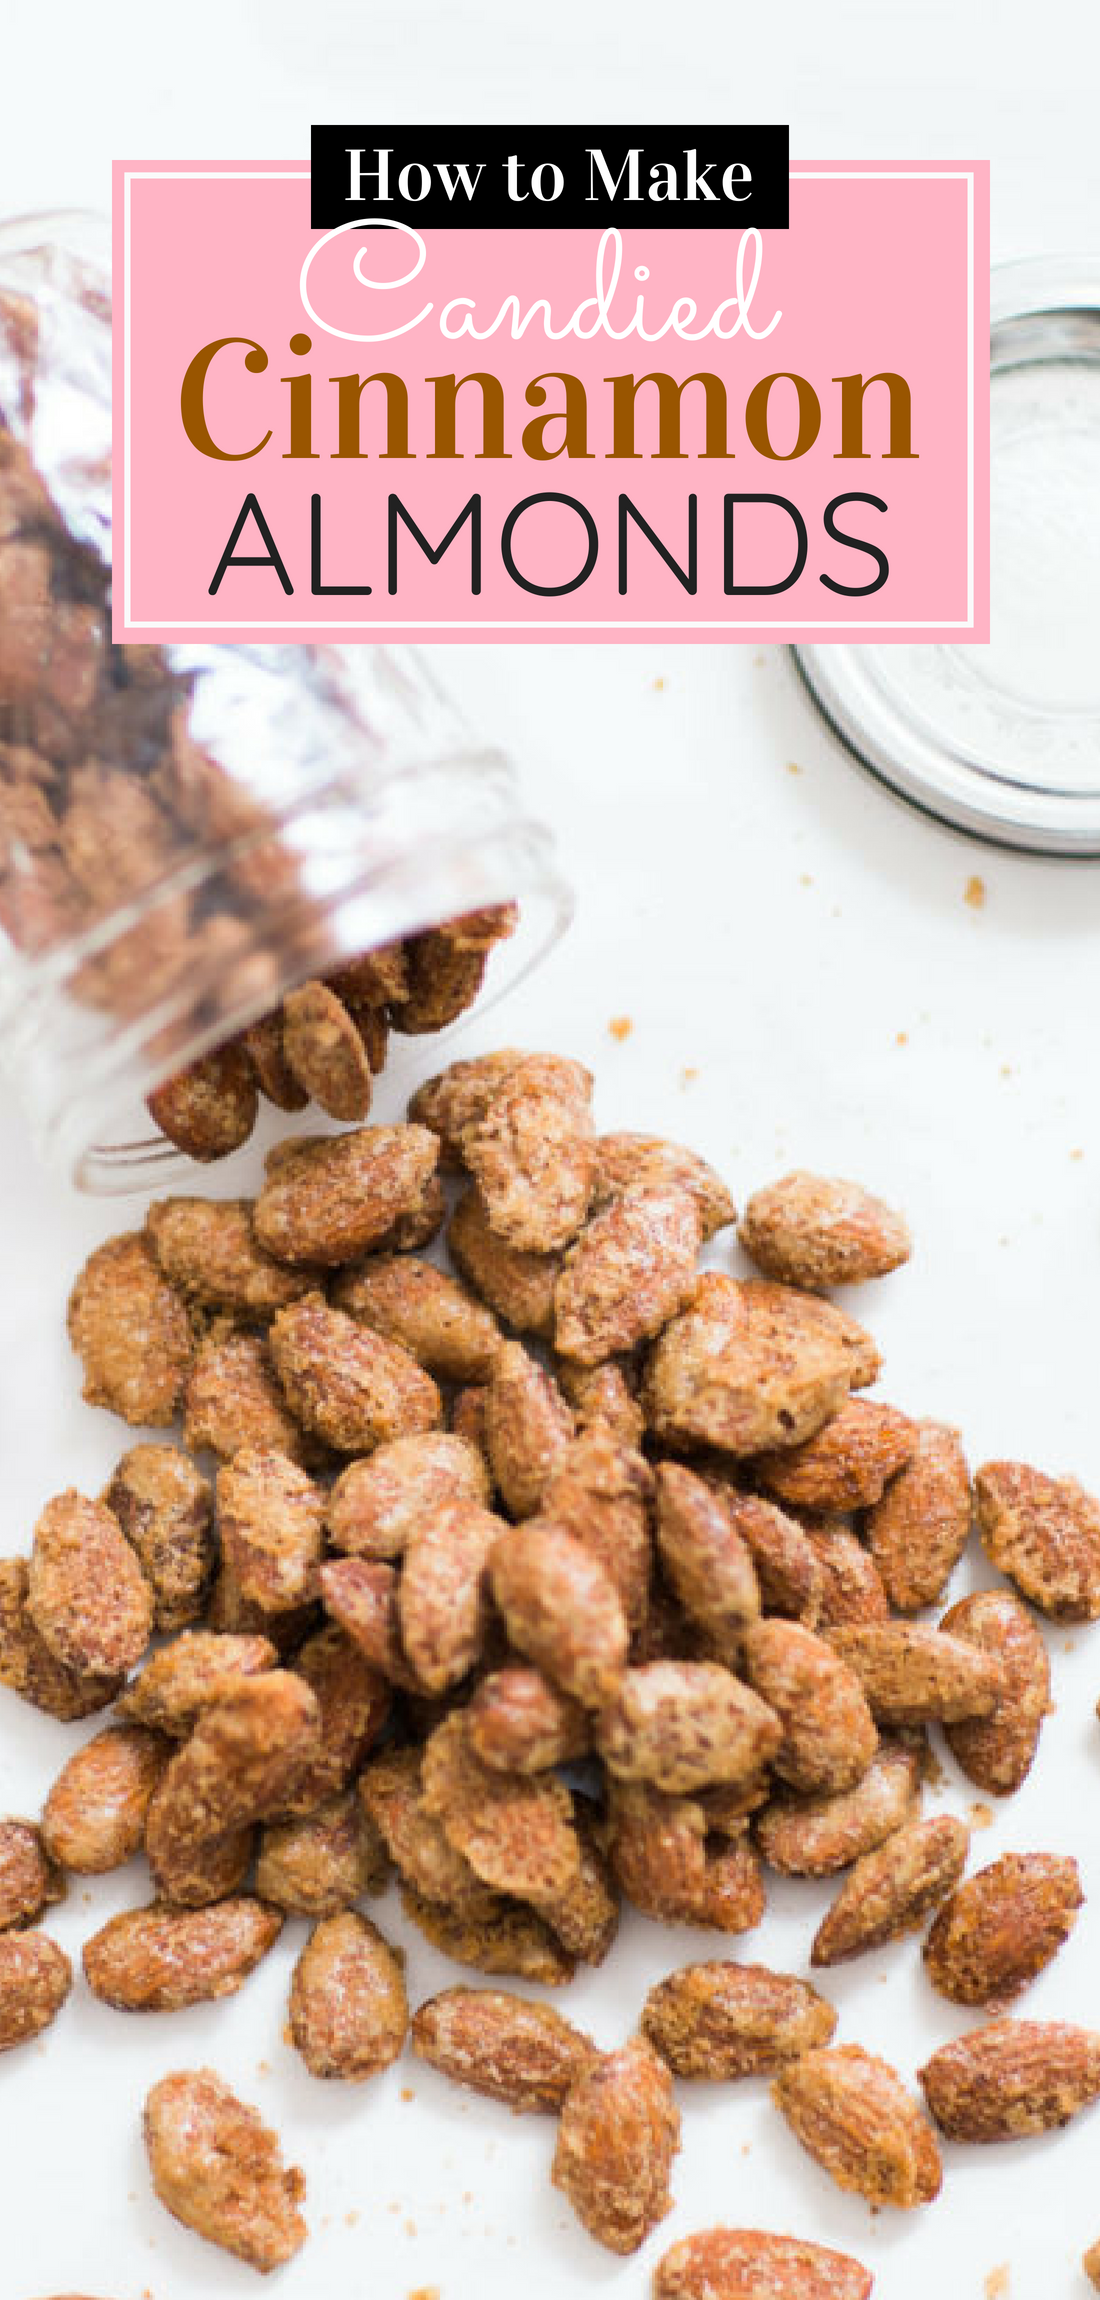 How to make candied cinnamon-roasted almonds. Click through for the simple and amazing recipe. #candiednuts #candiedalmonds #holidays #theholidays #holidaygifts #christmasgifts #cinnamonroastedalmonds #cinnamonroastednuts | glitterinc.com | @glitterinc